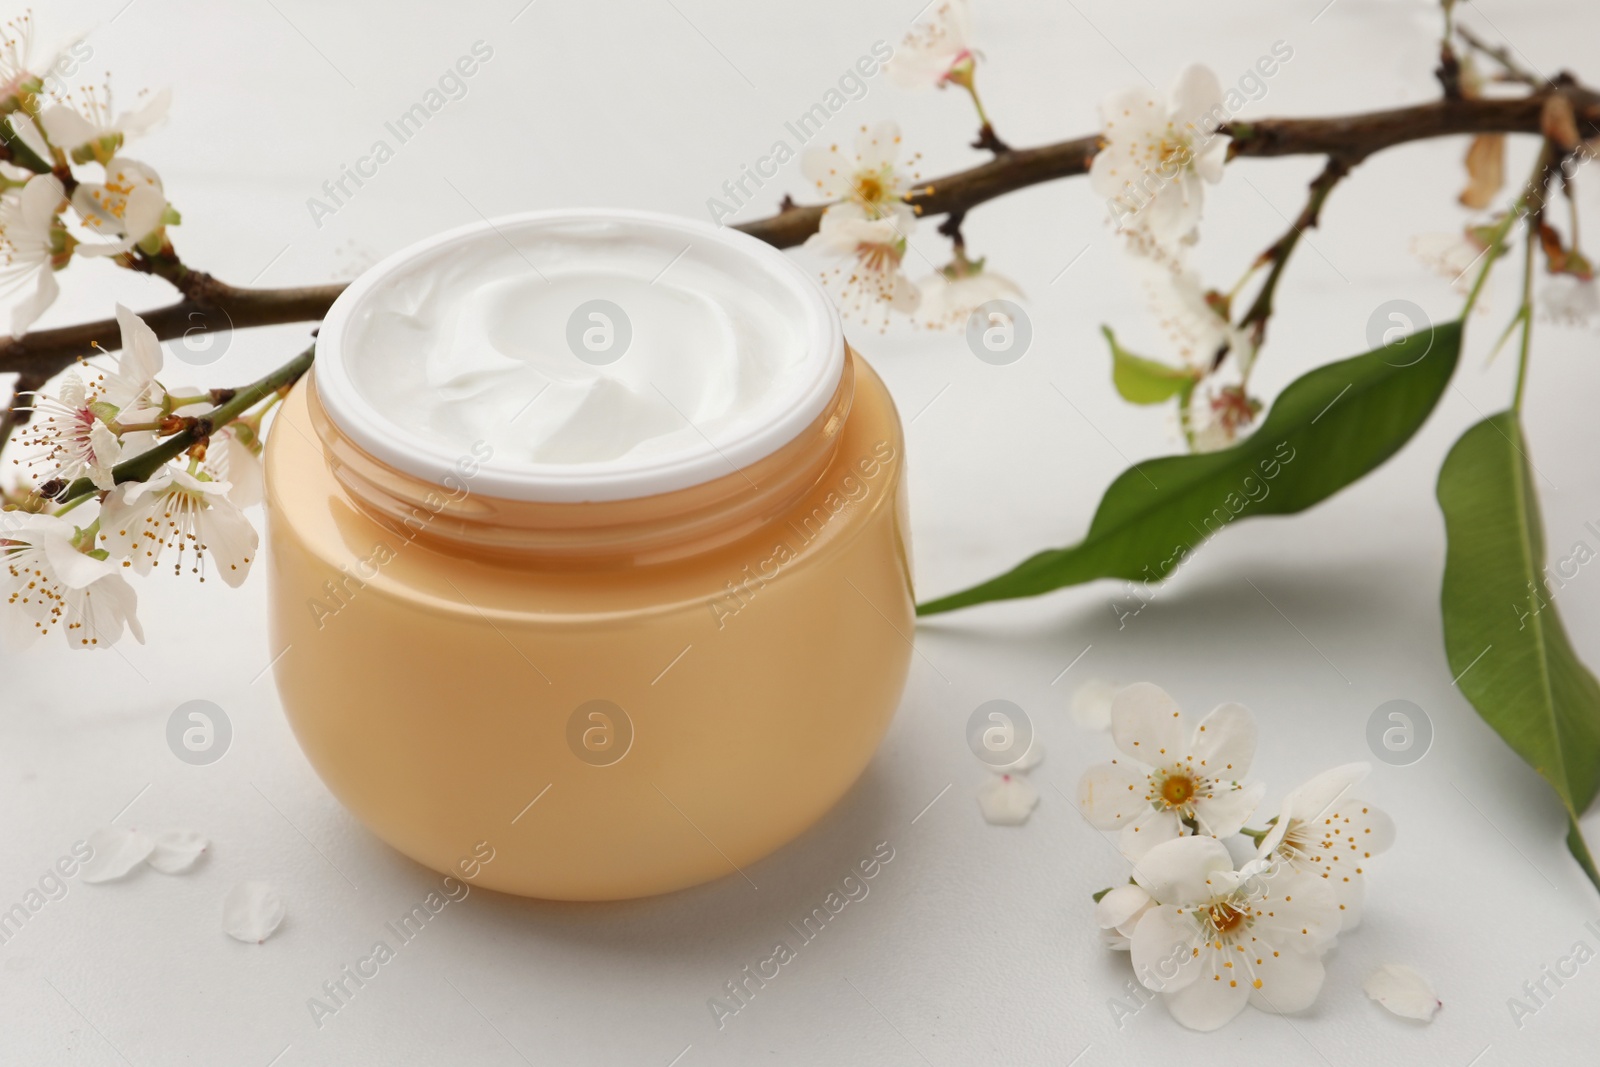 Photo of Jar of face cream, leaves, tree branch and flowers on white marble table